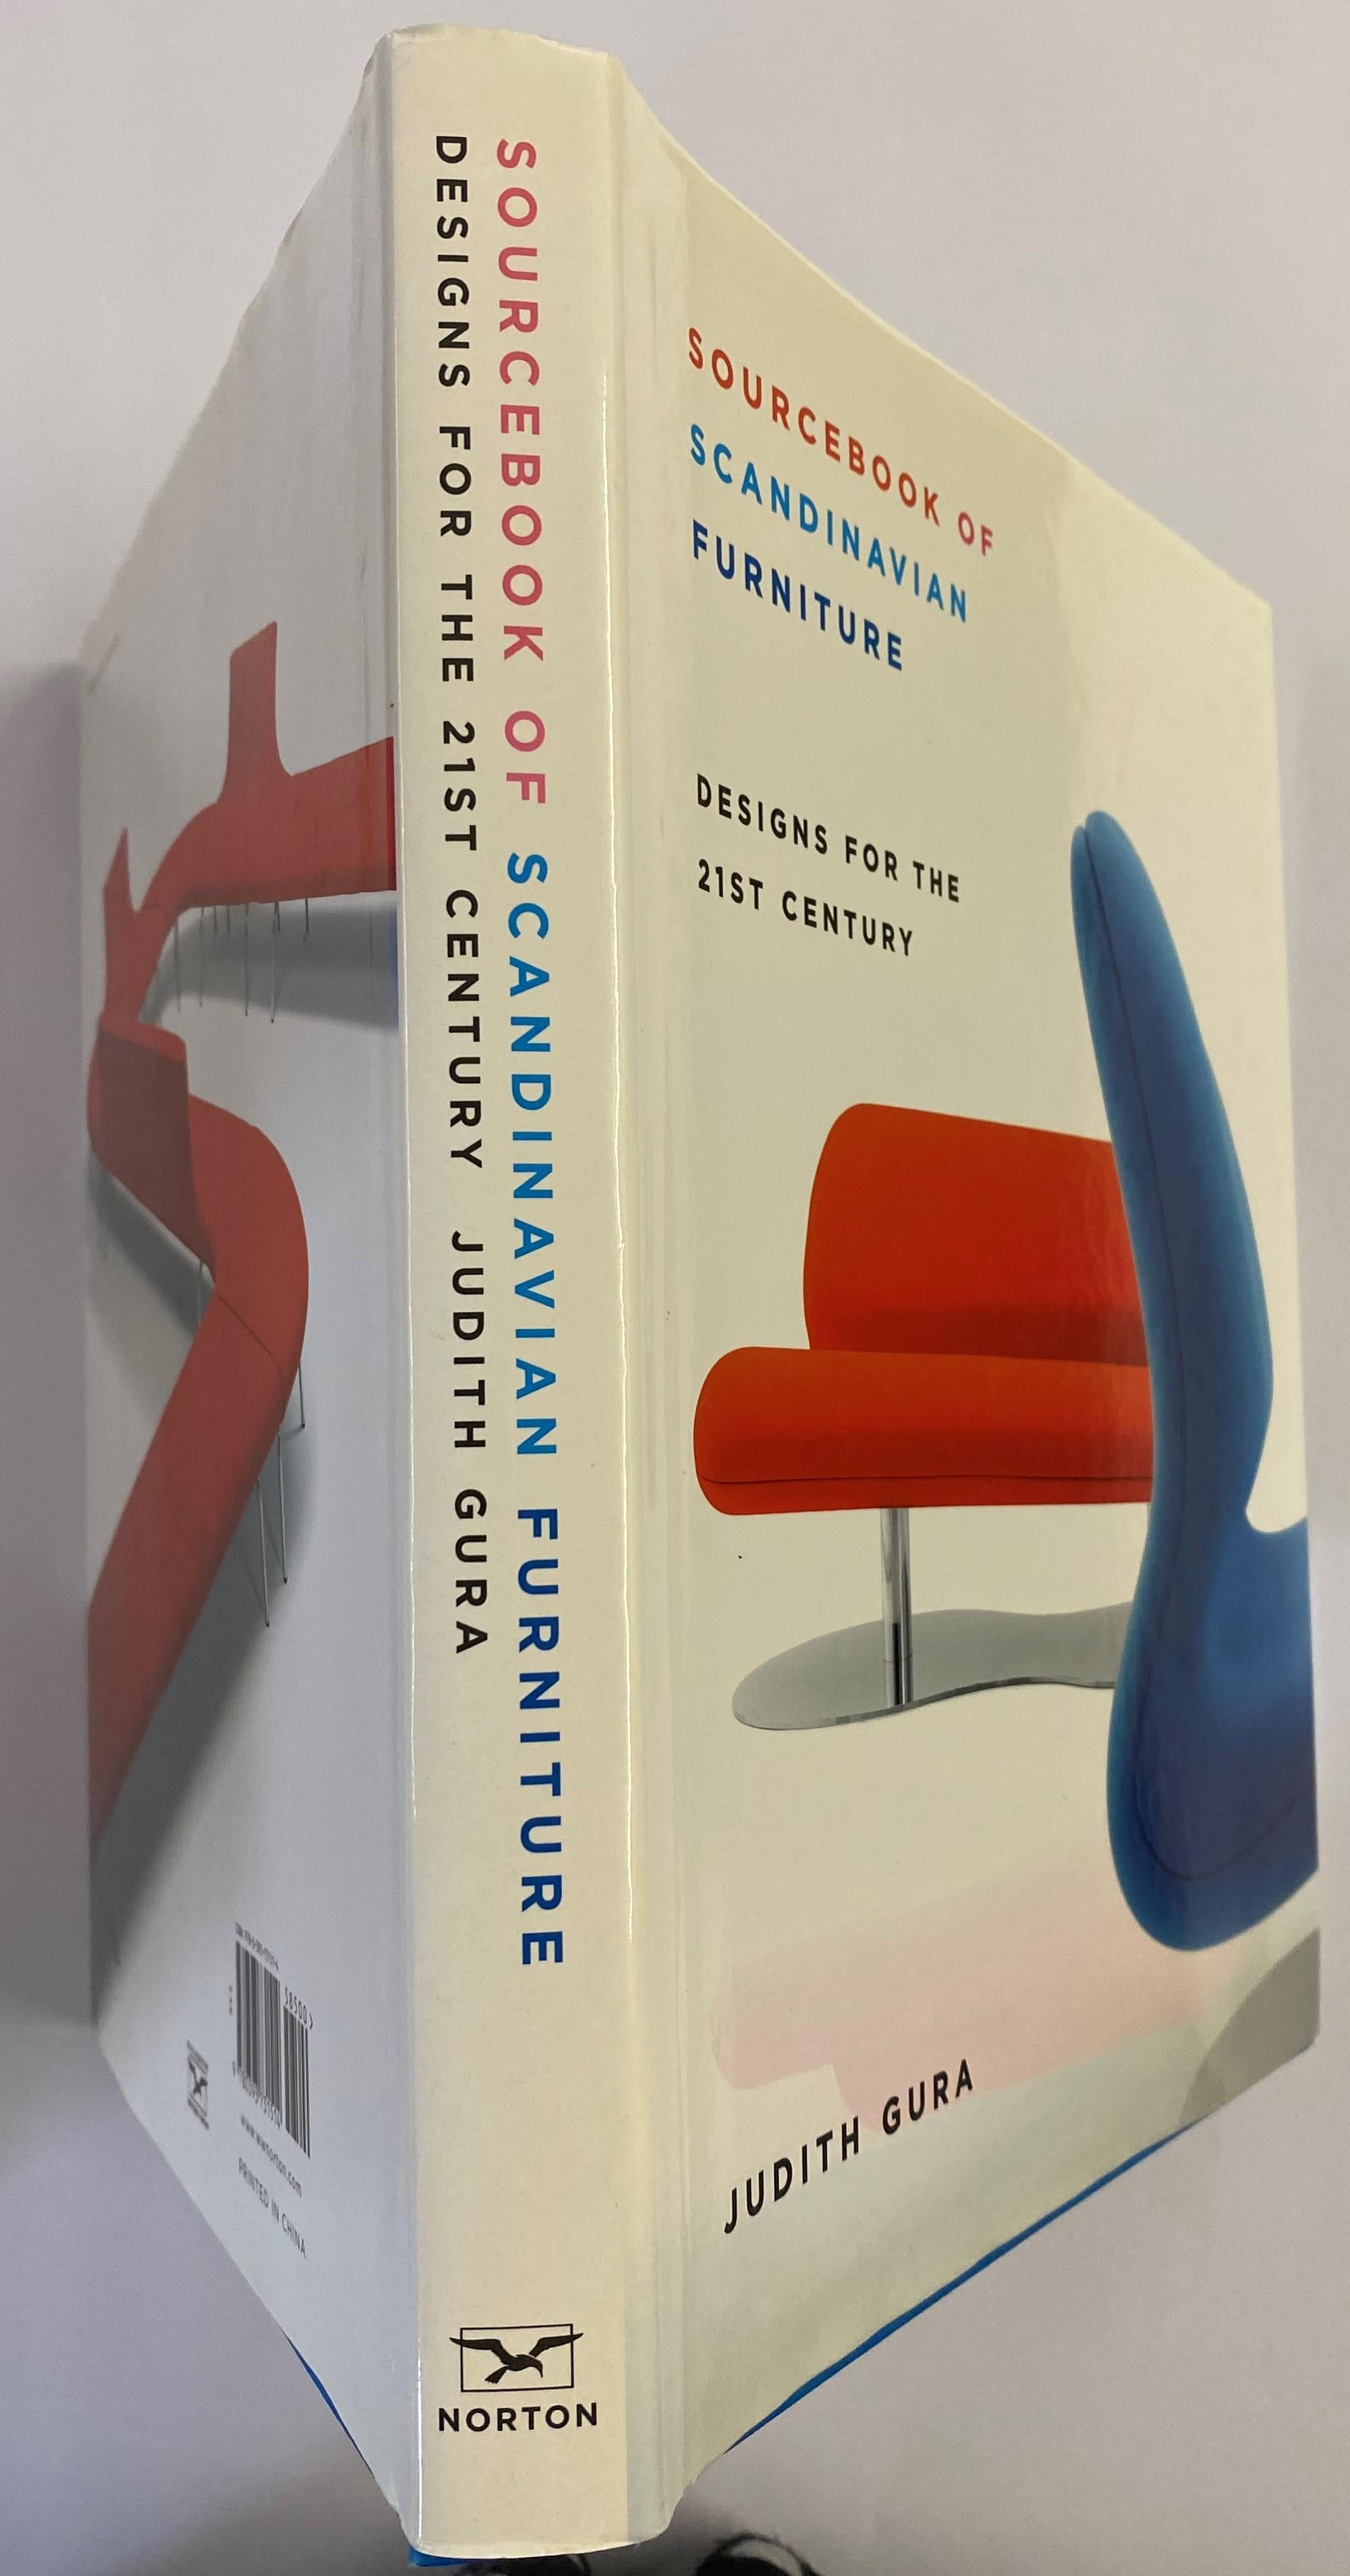 Sourcebook of Scandinavian Furniture: Designs for the 21st Century (Book) For Sale 12